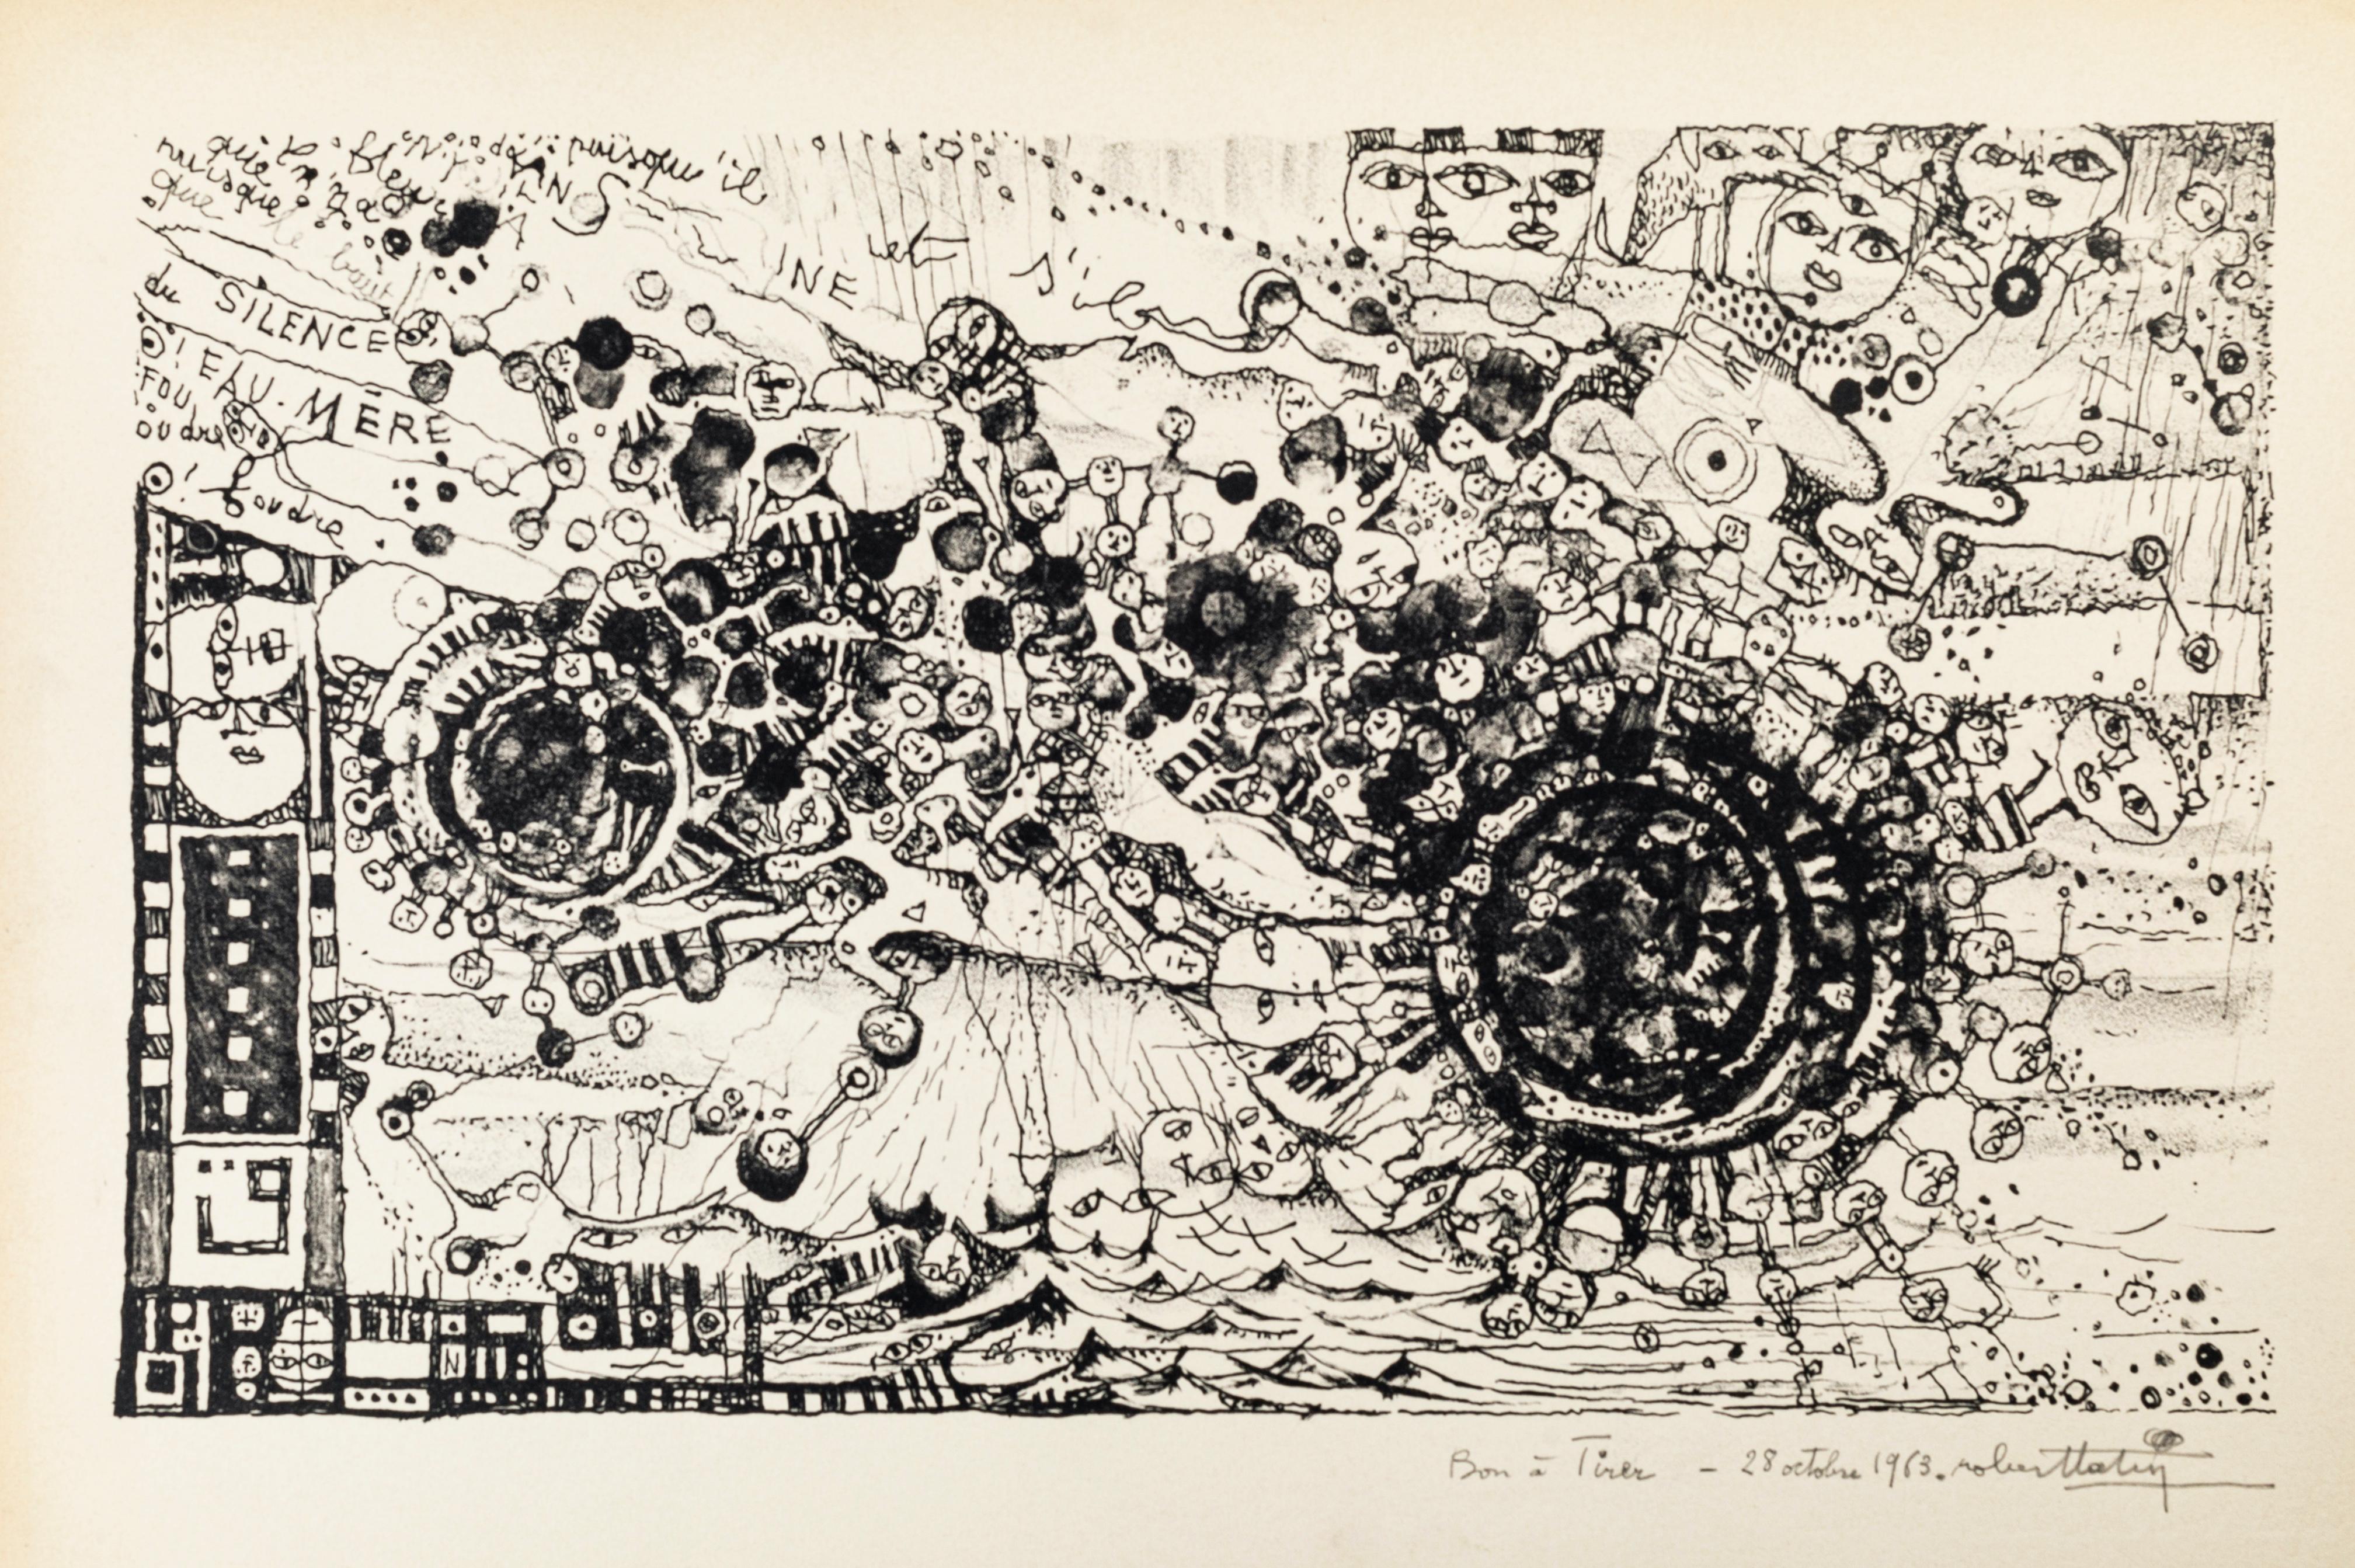 Image dimensions: 25 x 43 cm.

Vortex is an original black and white lithograph realized in 1963 by Robert Tatin (1902-1983).

Hand-signed and dated on the lower margin. Artist's proof (Bon à tirer handwritten on the lower margin)

The artwork